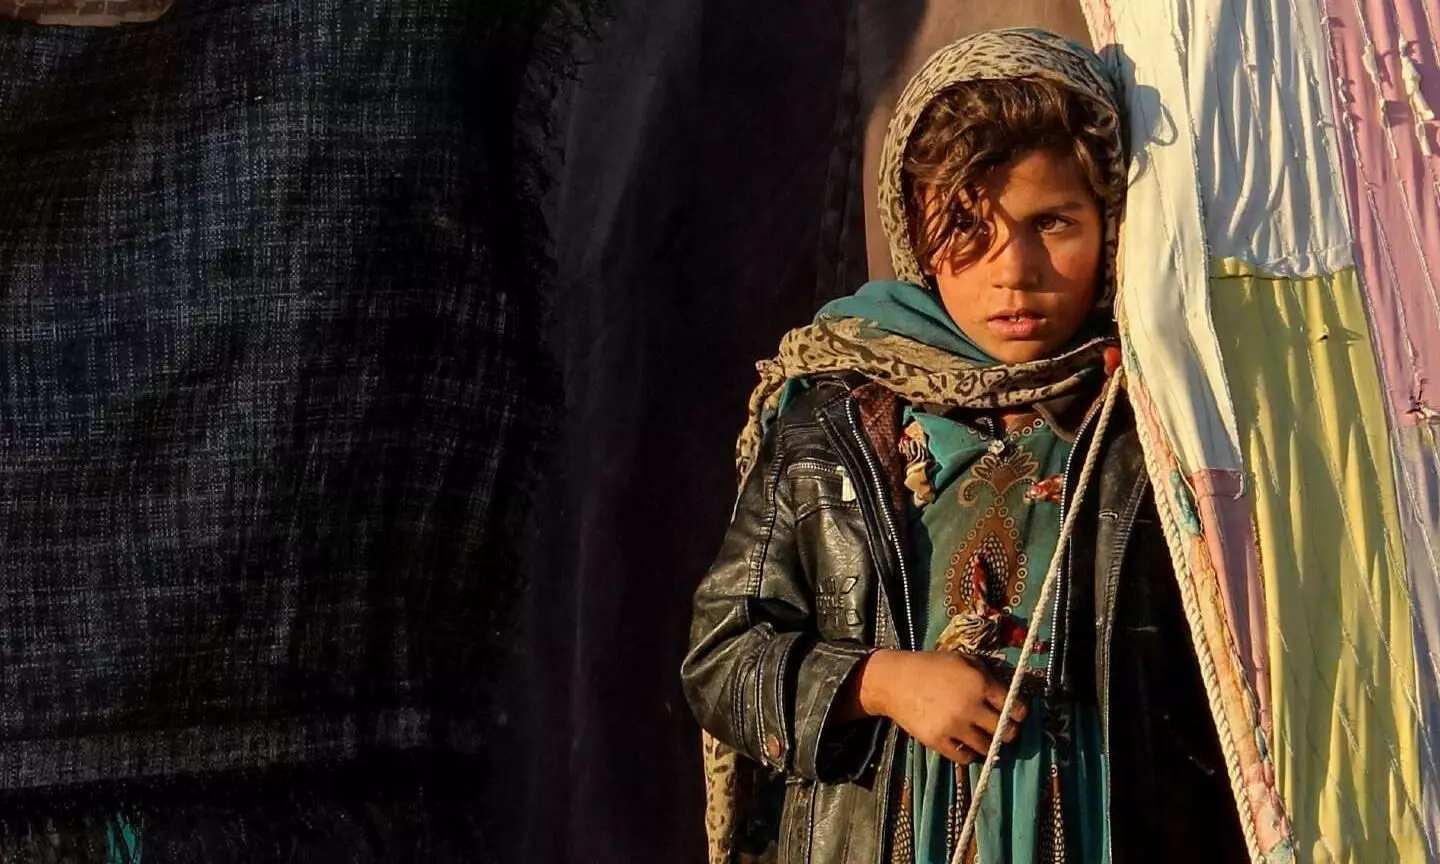 To prevent starvation, Afghan man sells 10-year-old daughter